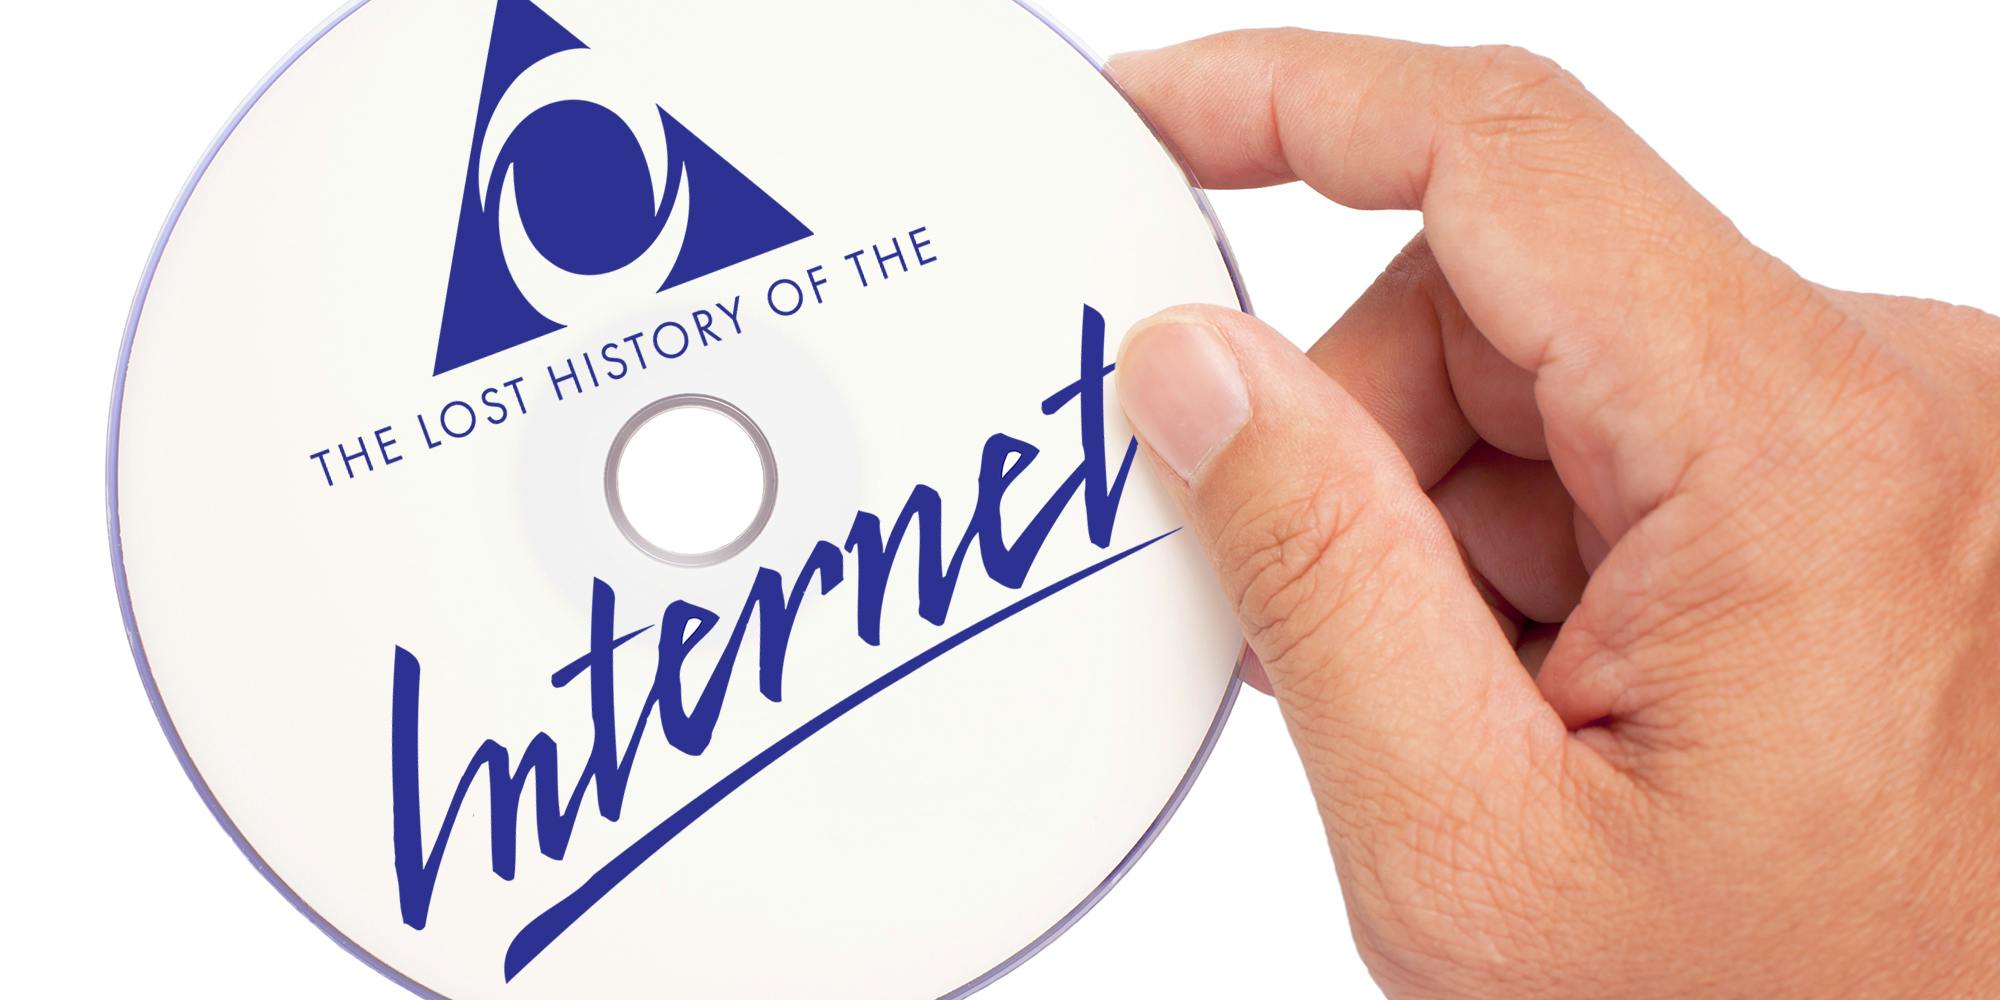 Hand holding CD with 'The Lost History of the Internet' as AOL logo